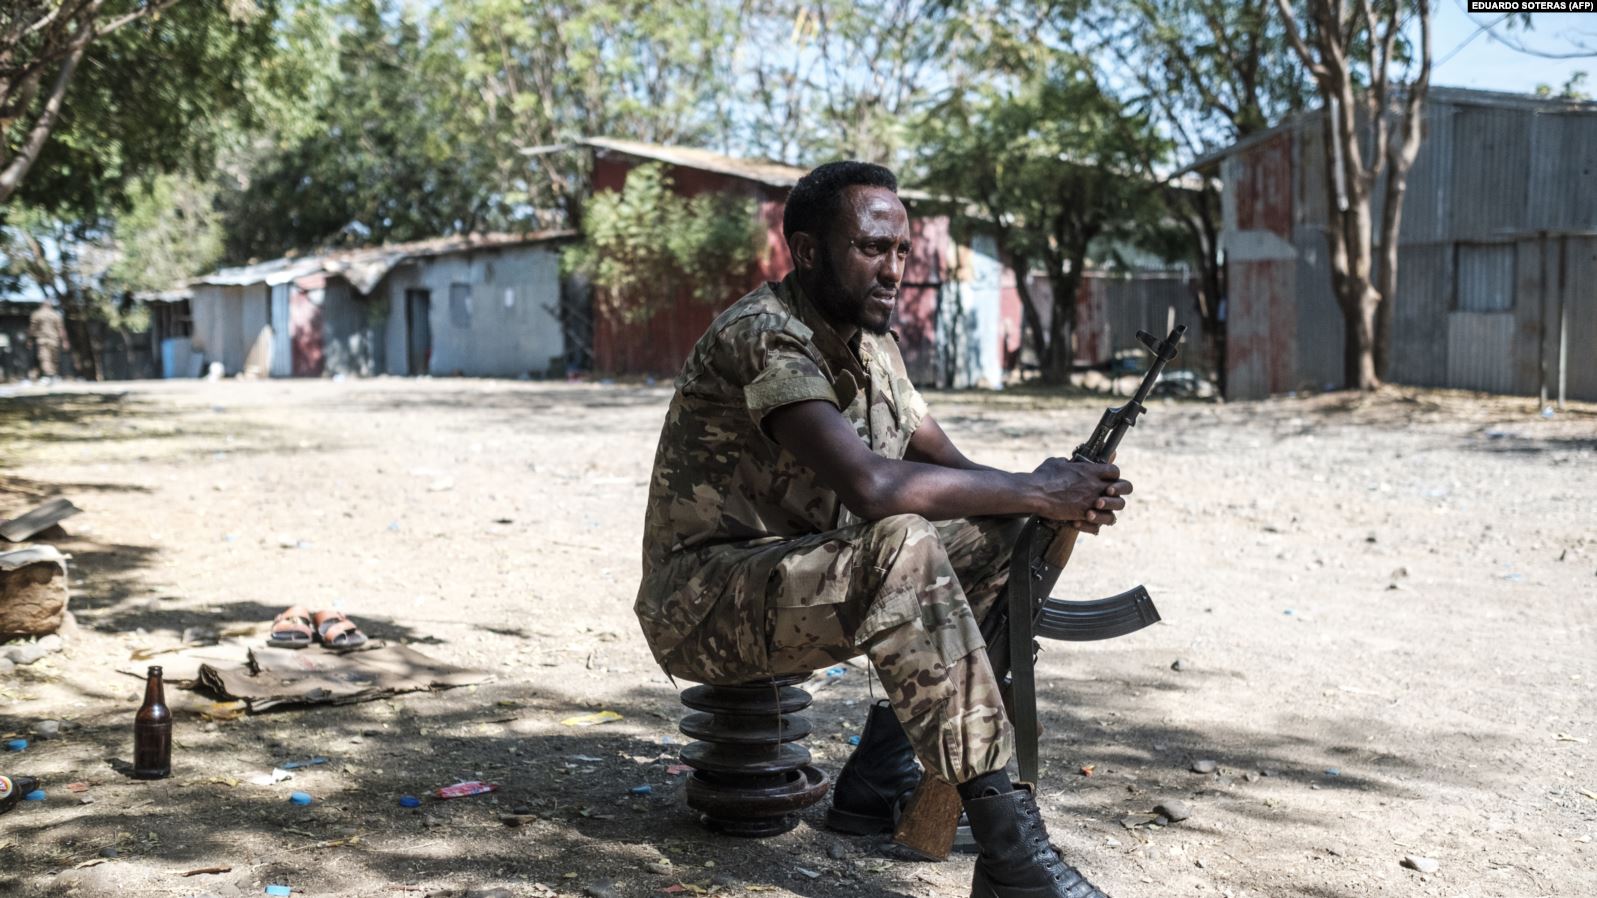 An Ethiopian soldier sits at the 5th Battalion of the Northern Command of the Ethiopian Army in Dansha, Ethiopia, on November 25, 2020